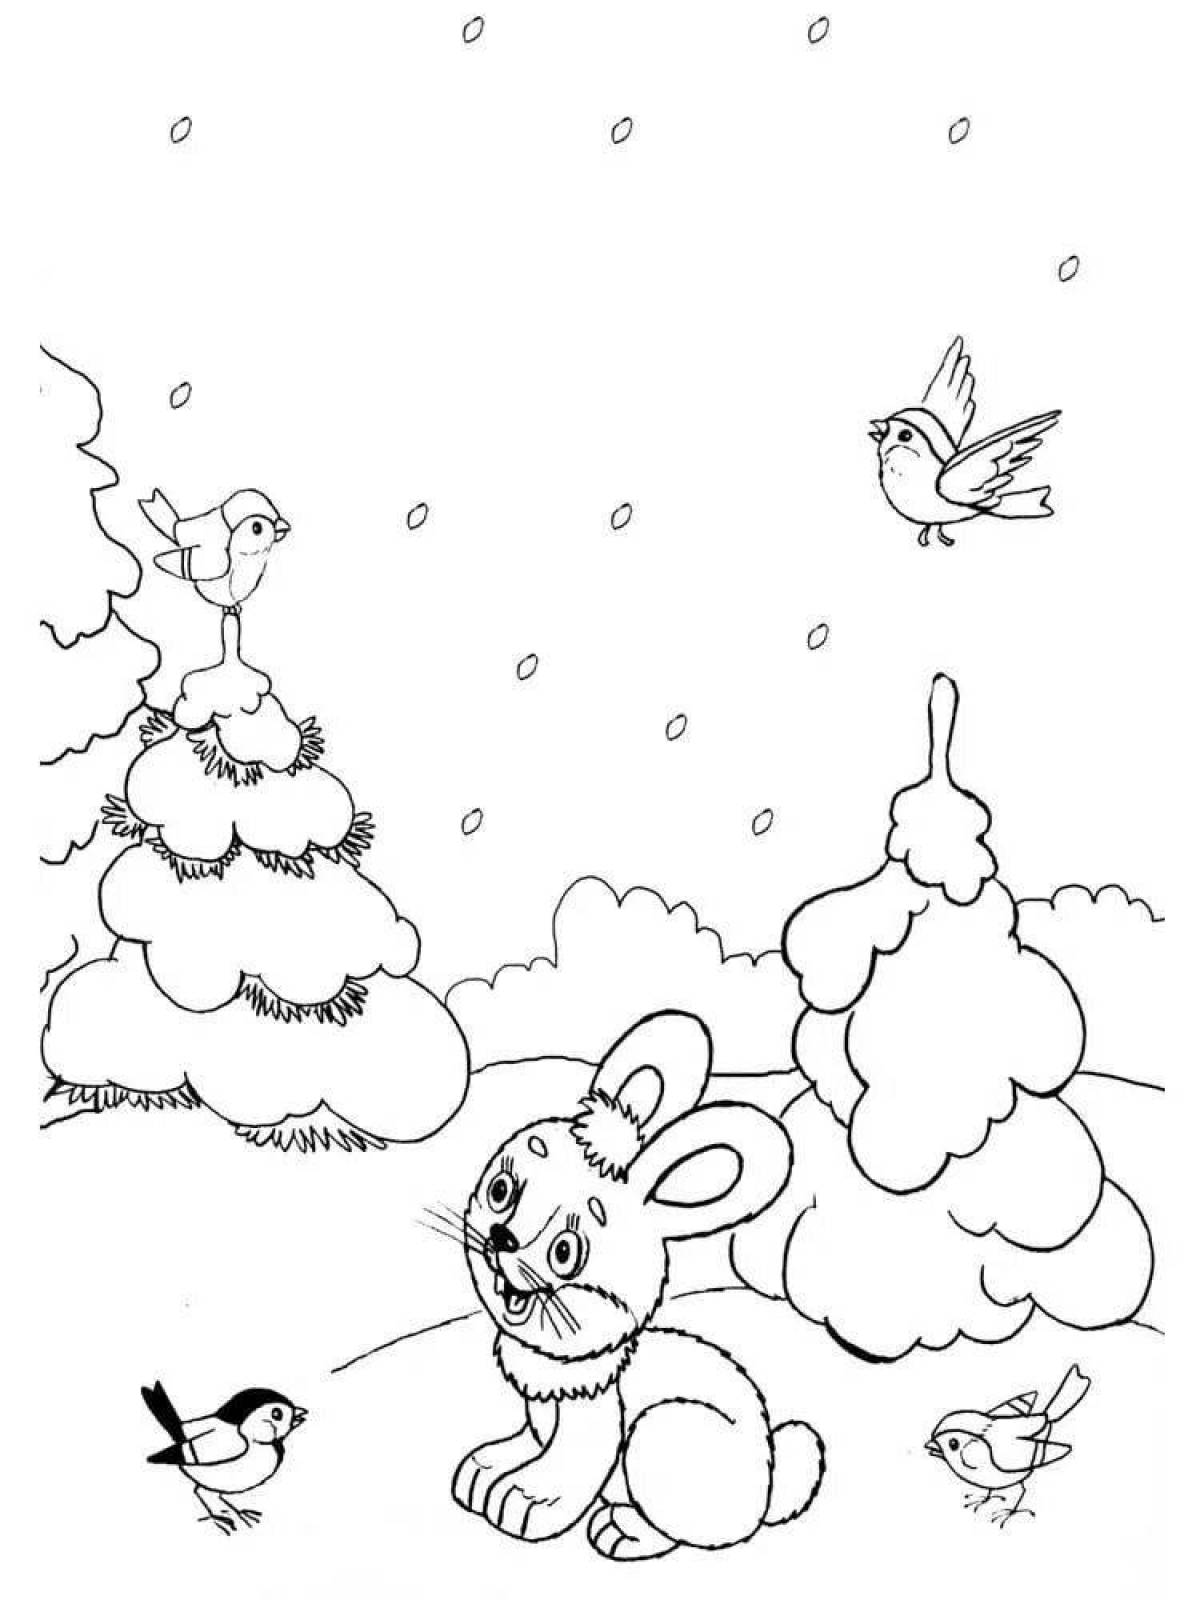 Fun coloring book for kids winter forest 3 4 years old